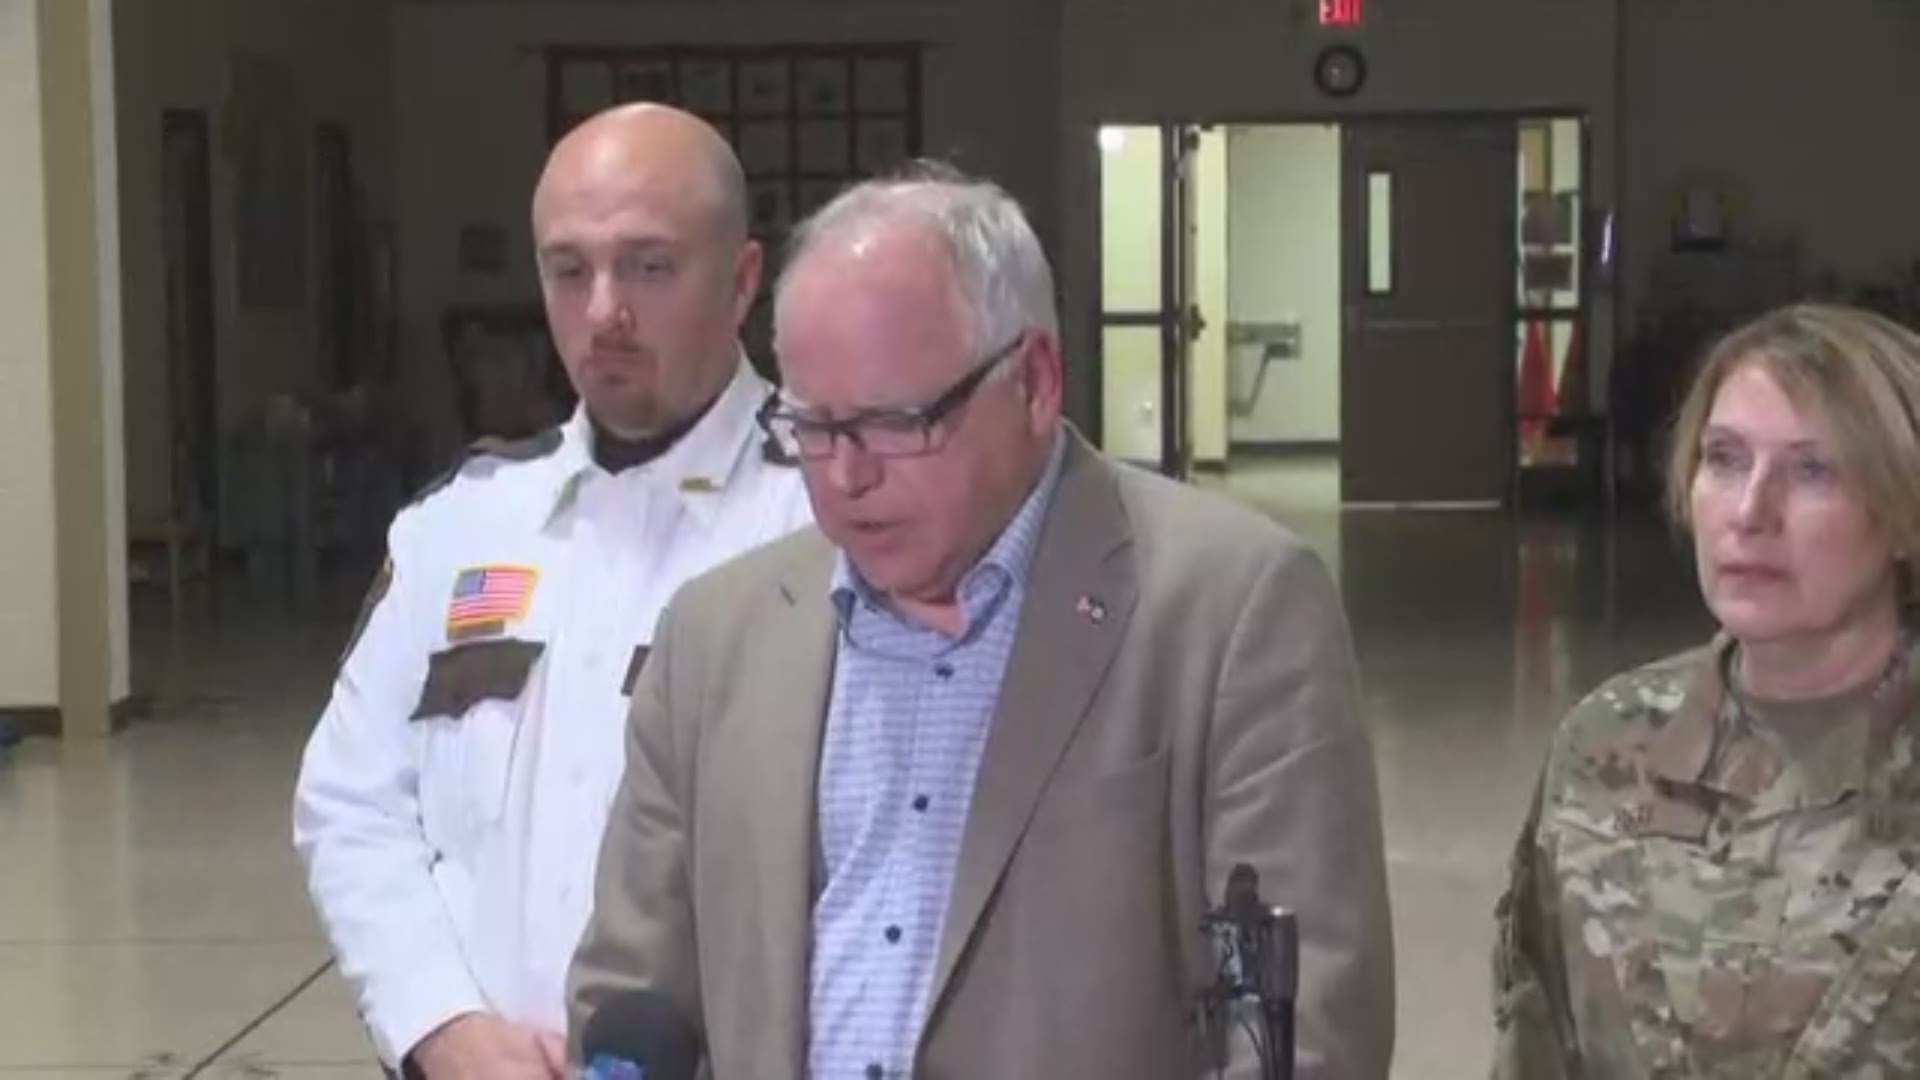 Gov. Tim Walz confirmed the deaths during a press conference Thursday evening.